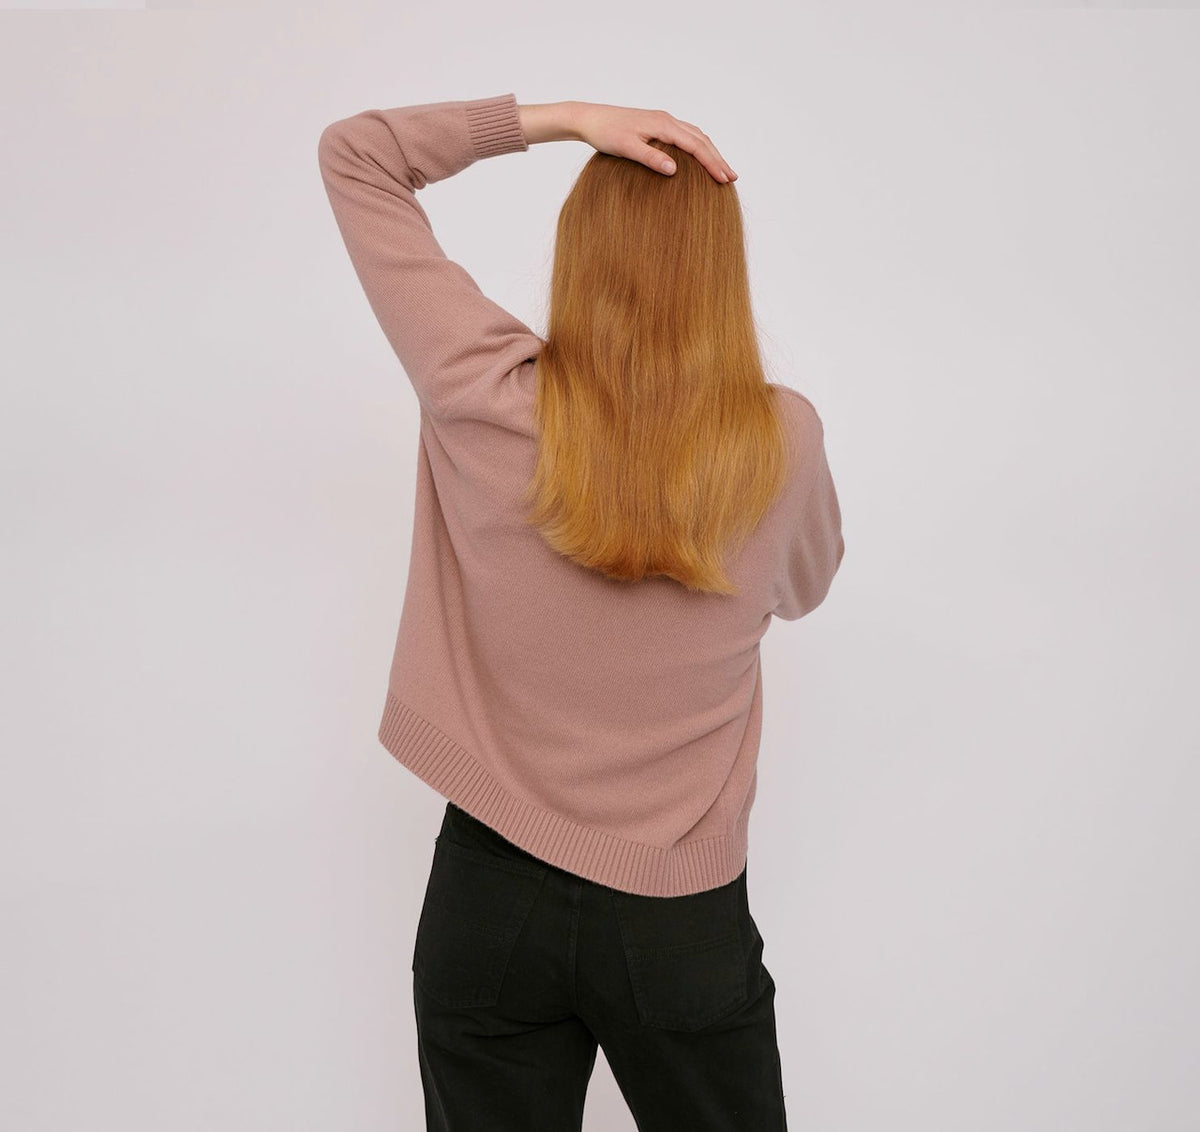 A woman wearing an Organic Basics Recycled Wool Boxy Knit Jumper - Dusty Rose and black pants.